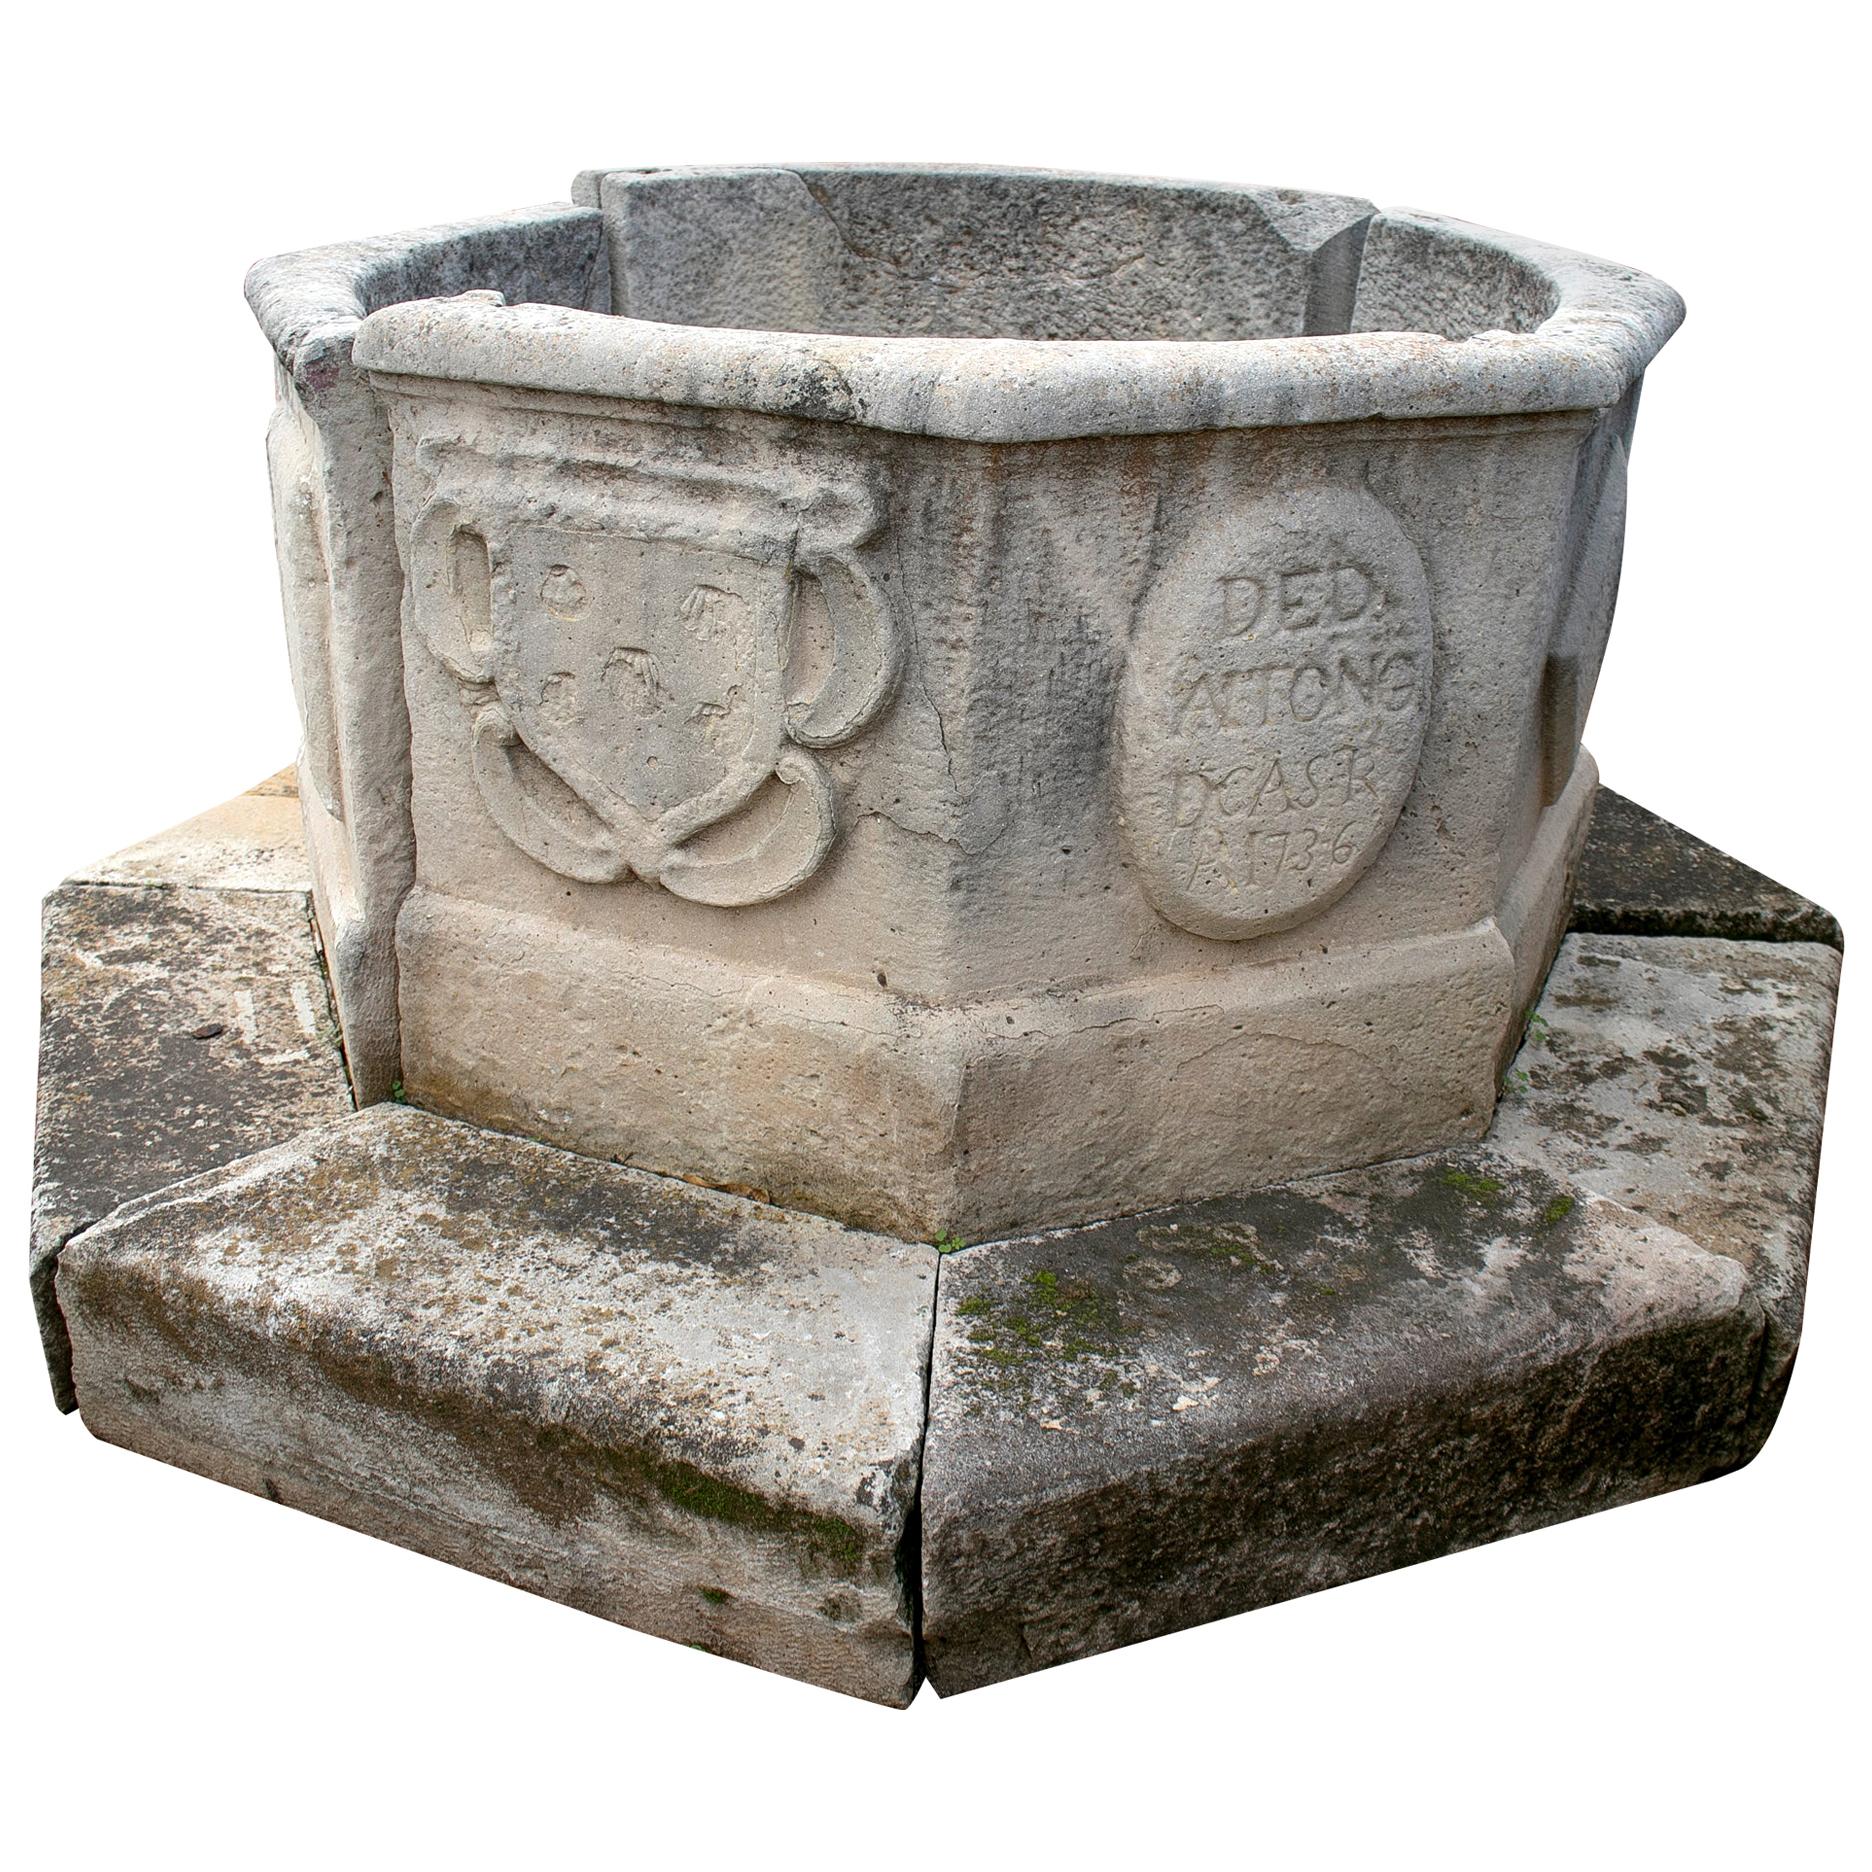 19th Octagonal Stone Wellhead with Family Emblems and Inscription